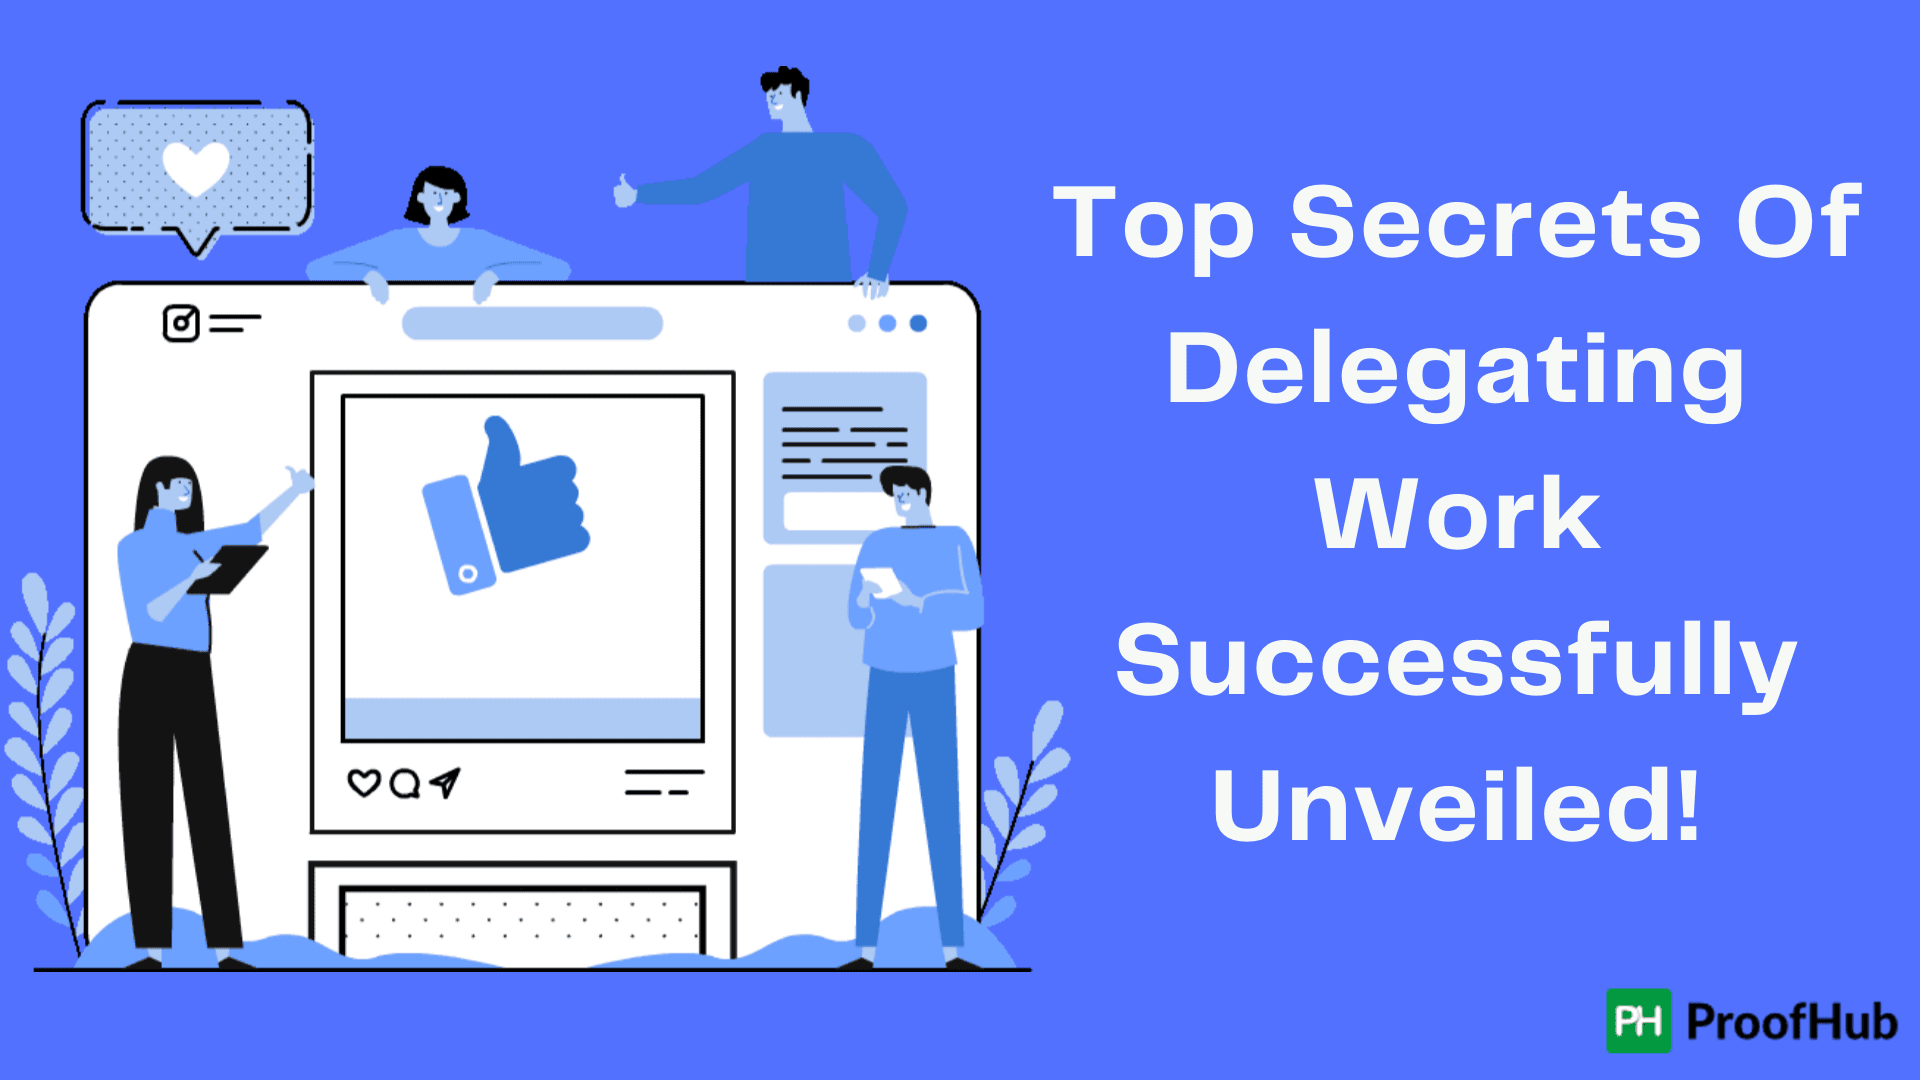 Top Secrets Of Delegating Work Successfully Unveiled!